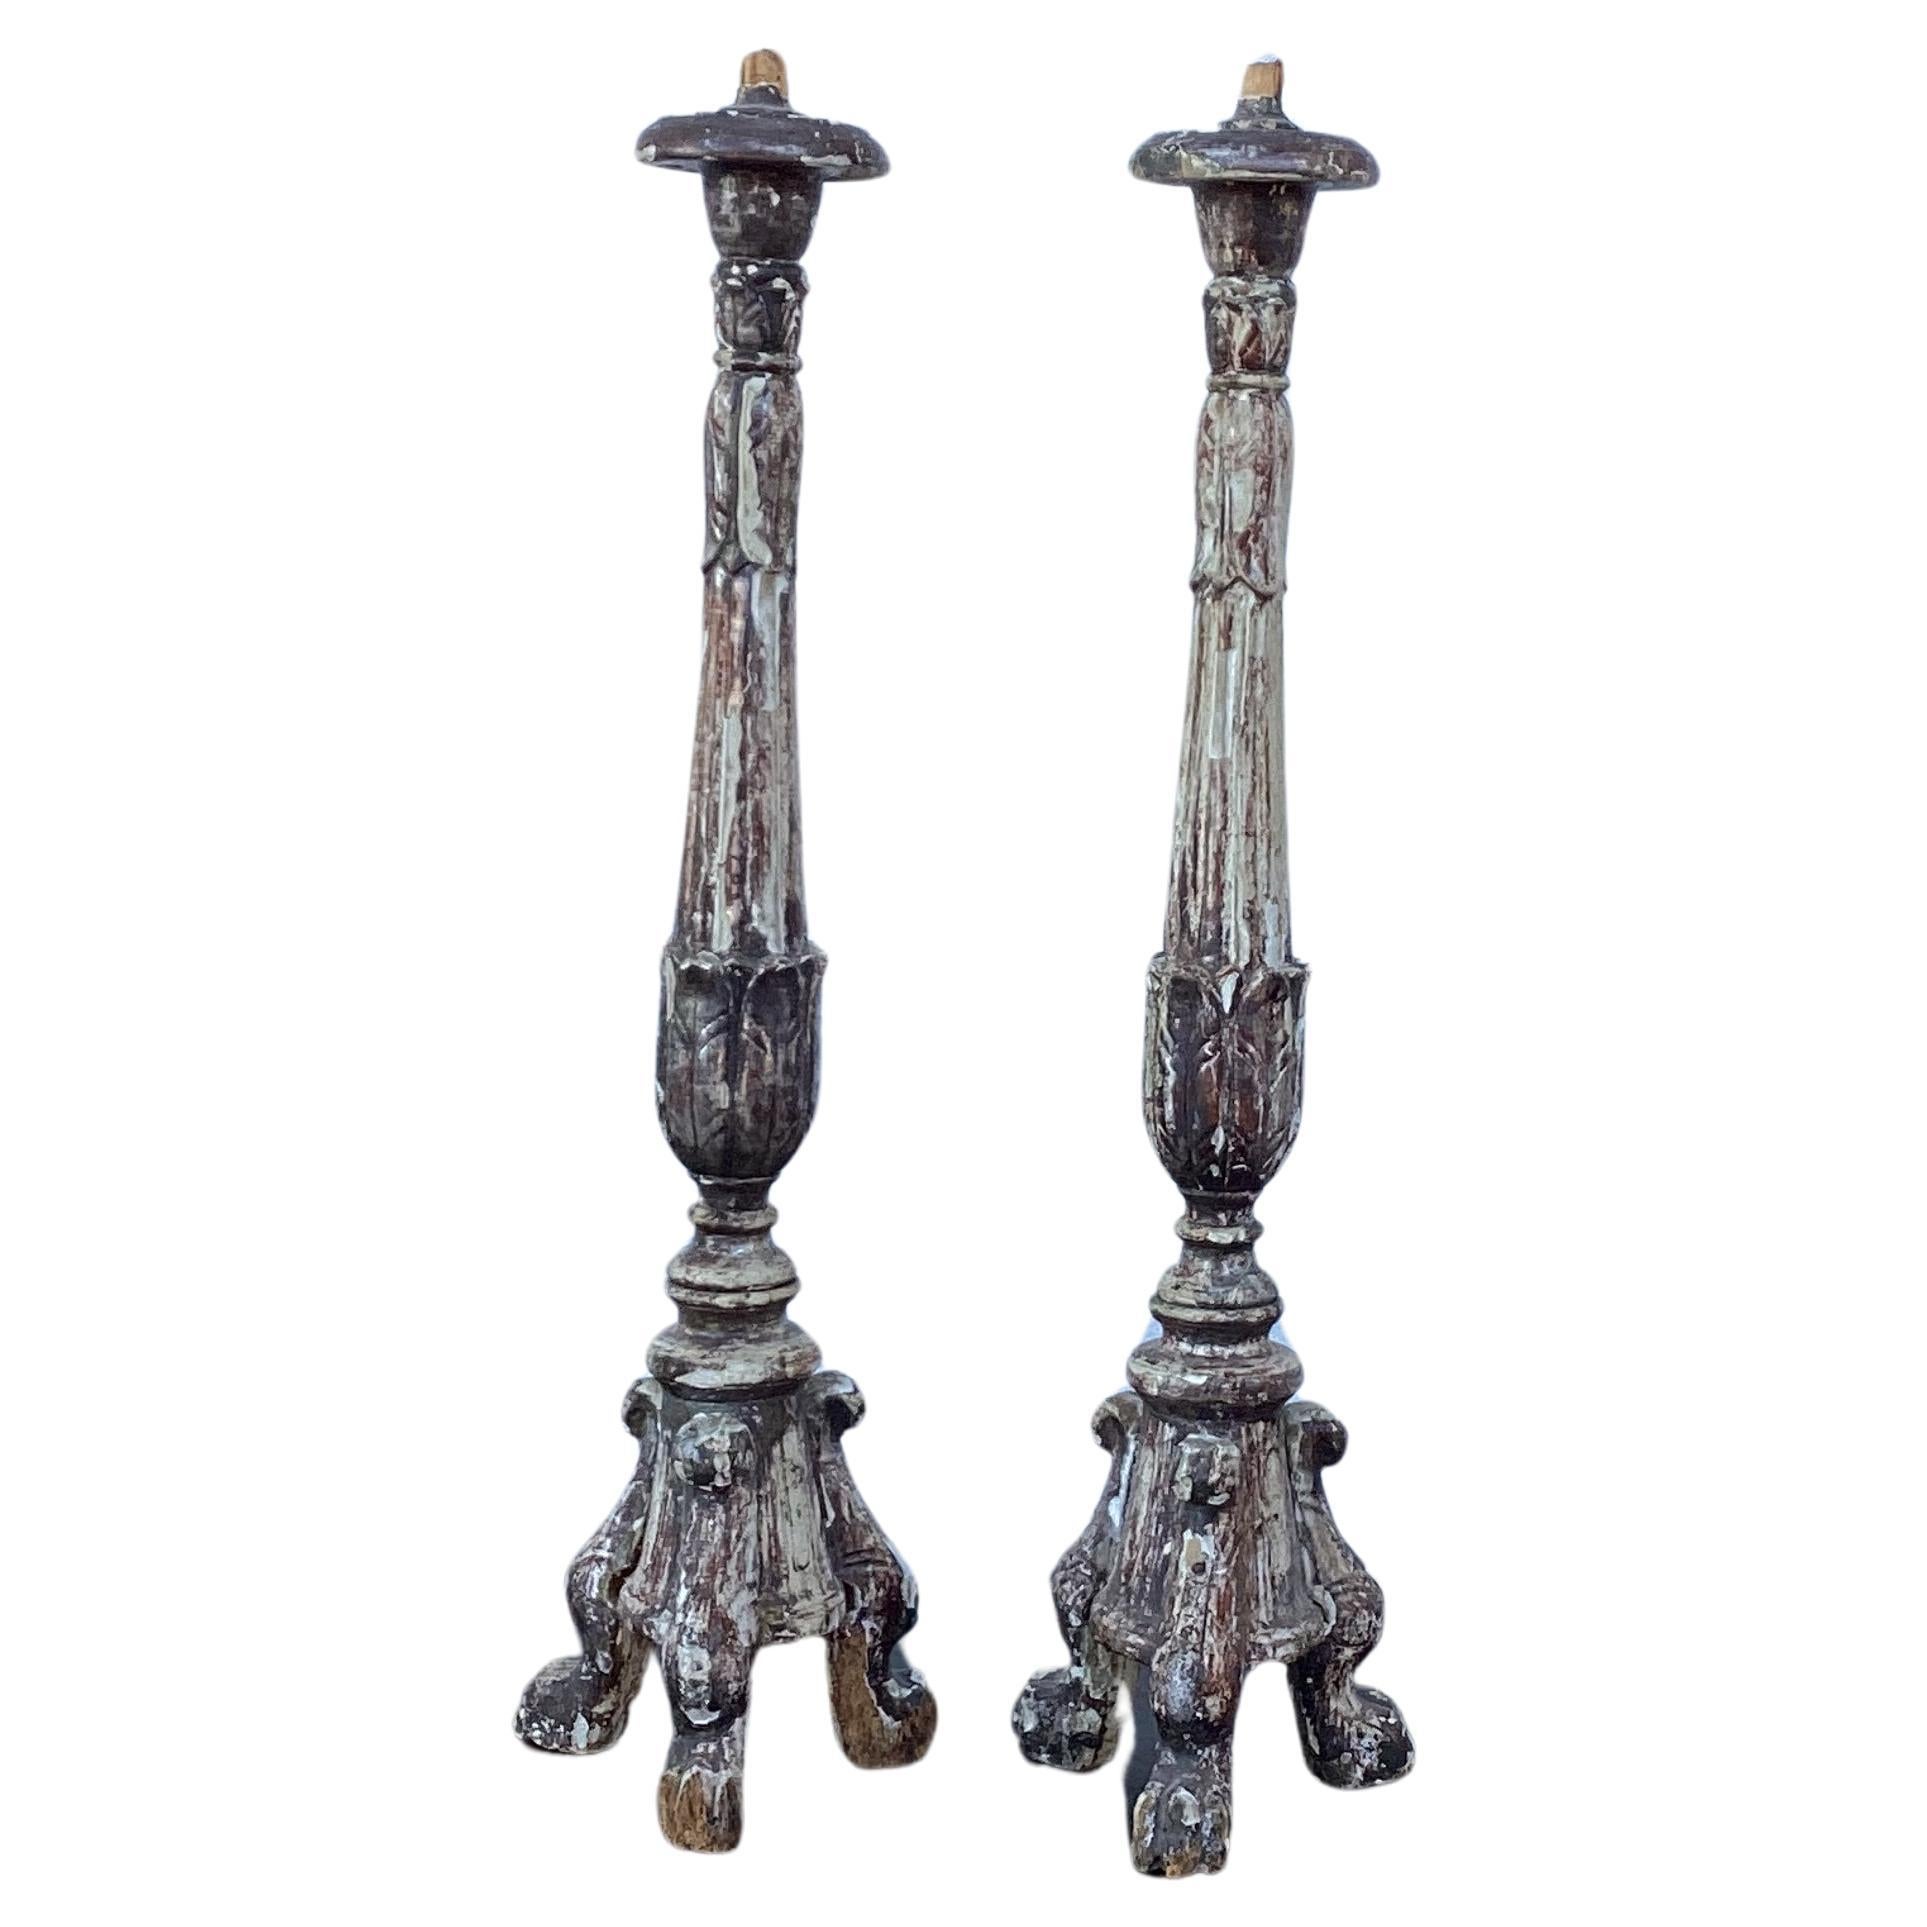 Very tall pair of 18th century Italian Baroque candlesticks. Exquisitely hand carved with wonderfully distressed silver gilt patina, resting on a scrolled tripod base. 